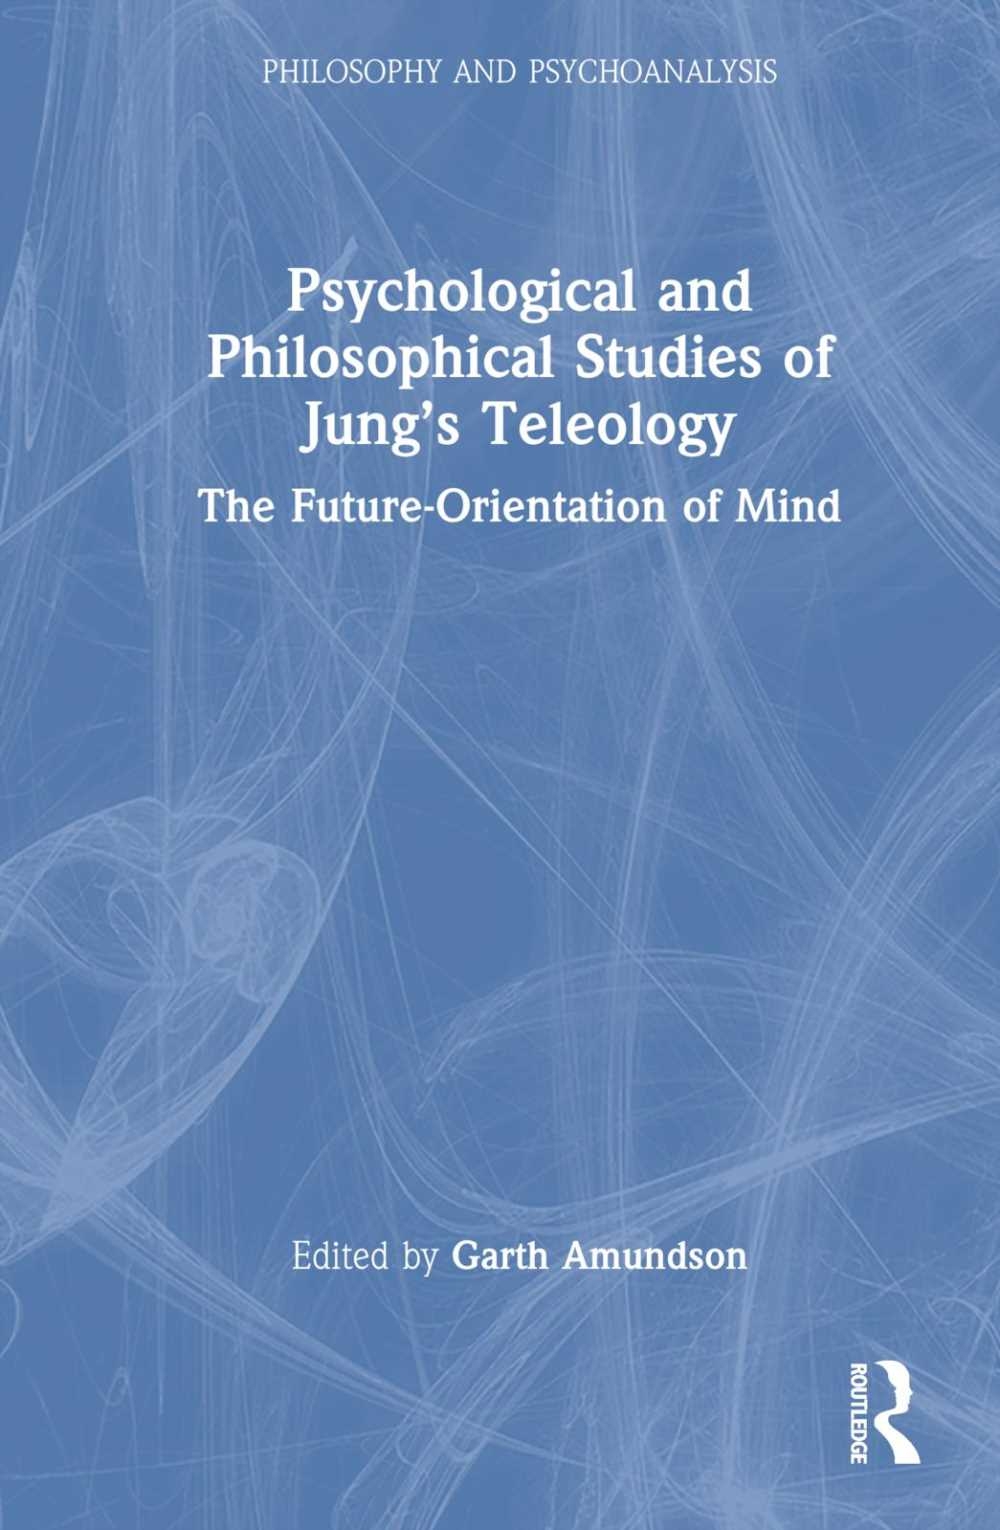 Psychological and Philosophical Studies of Jung’s Teleology: The Future-Orientation of Mind